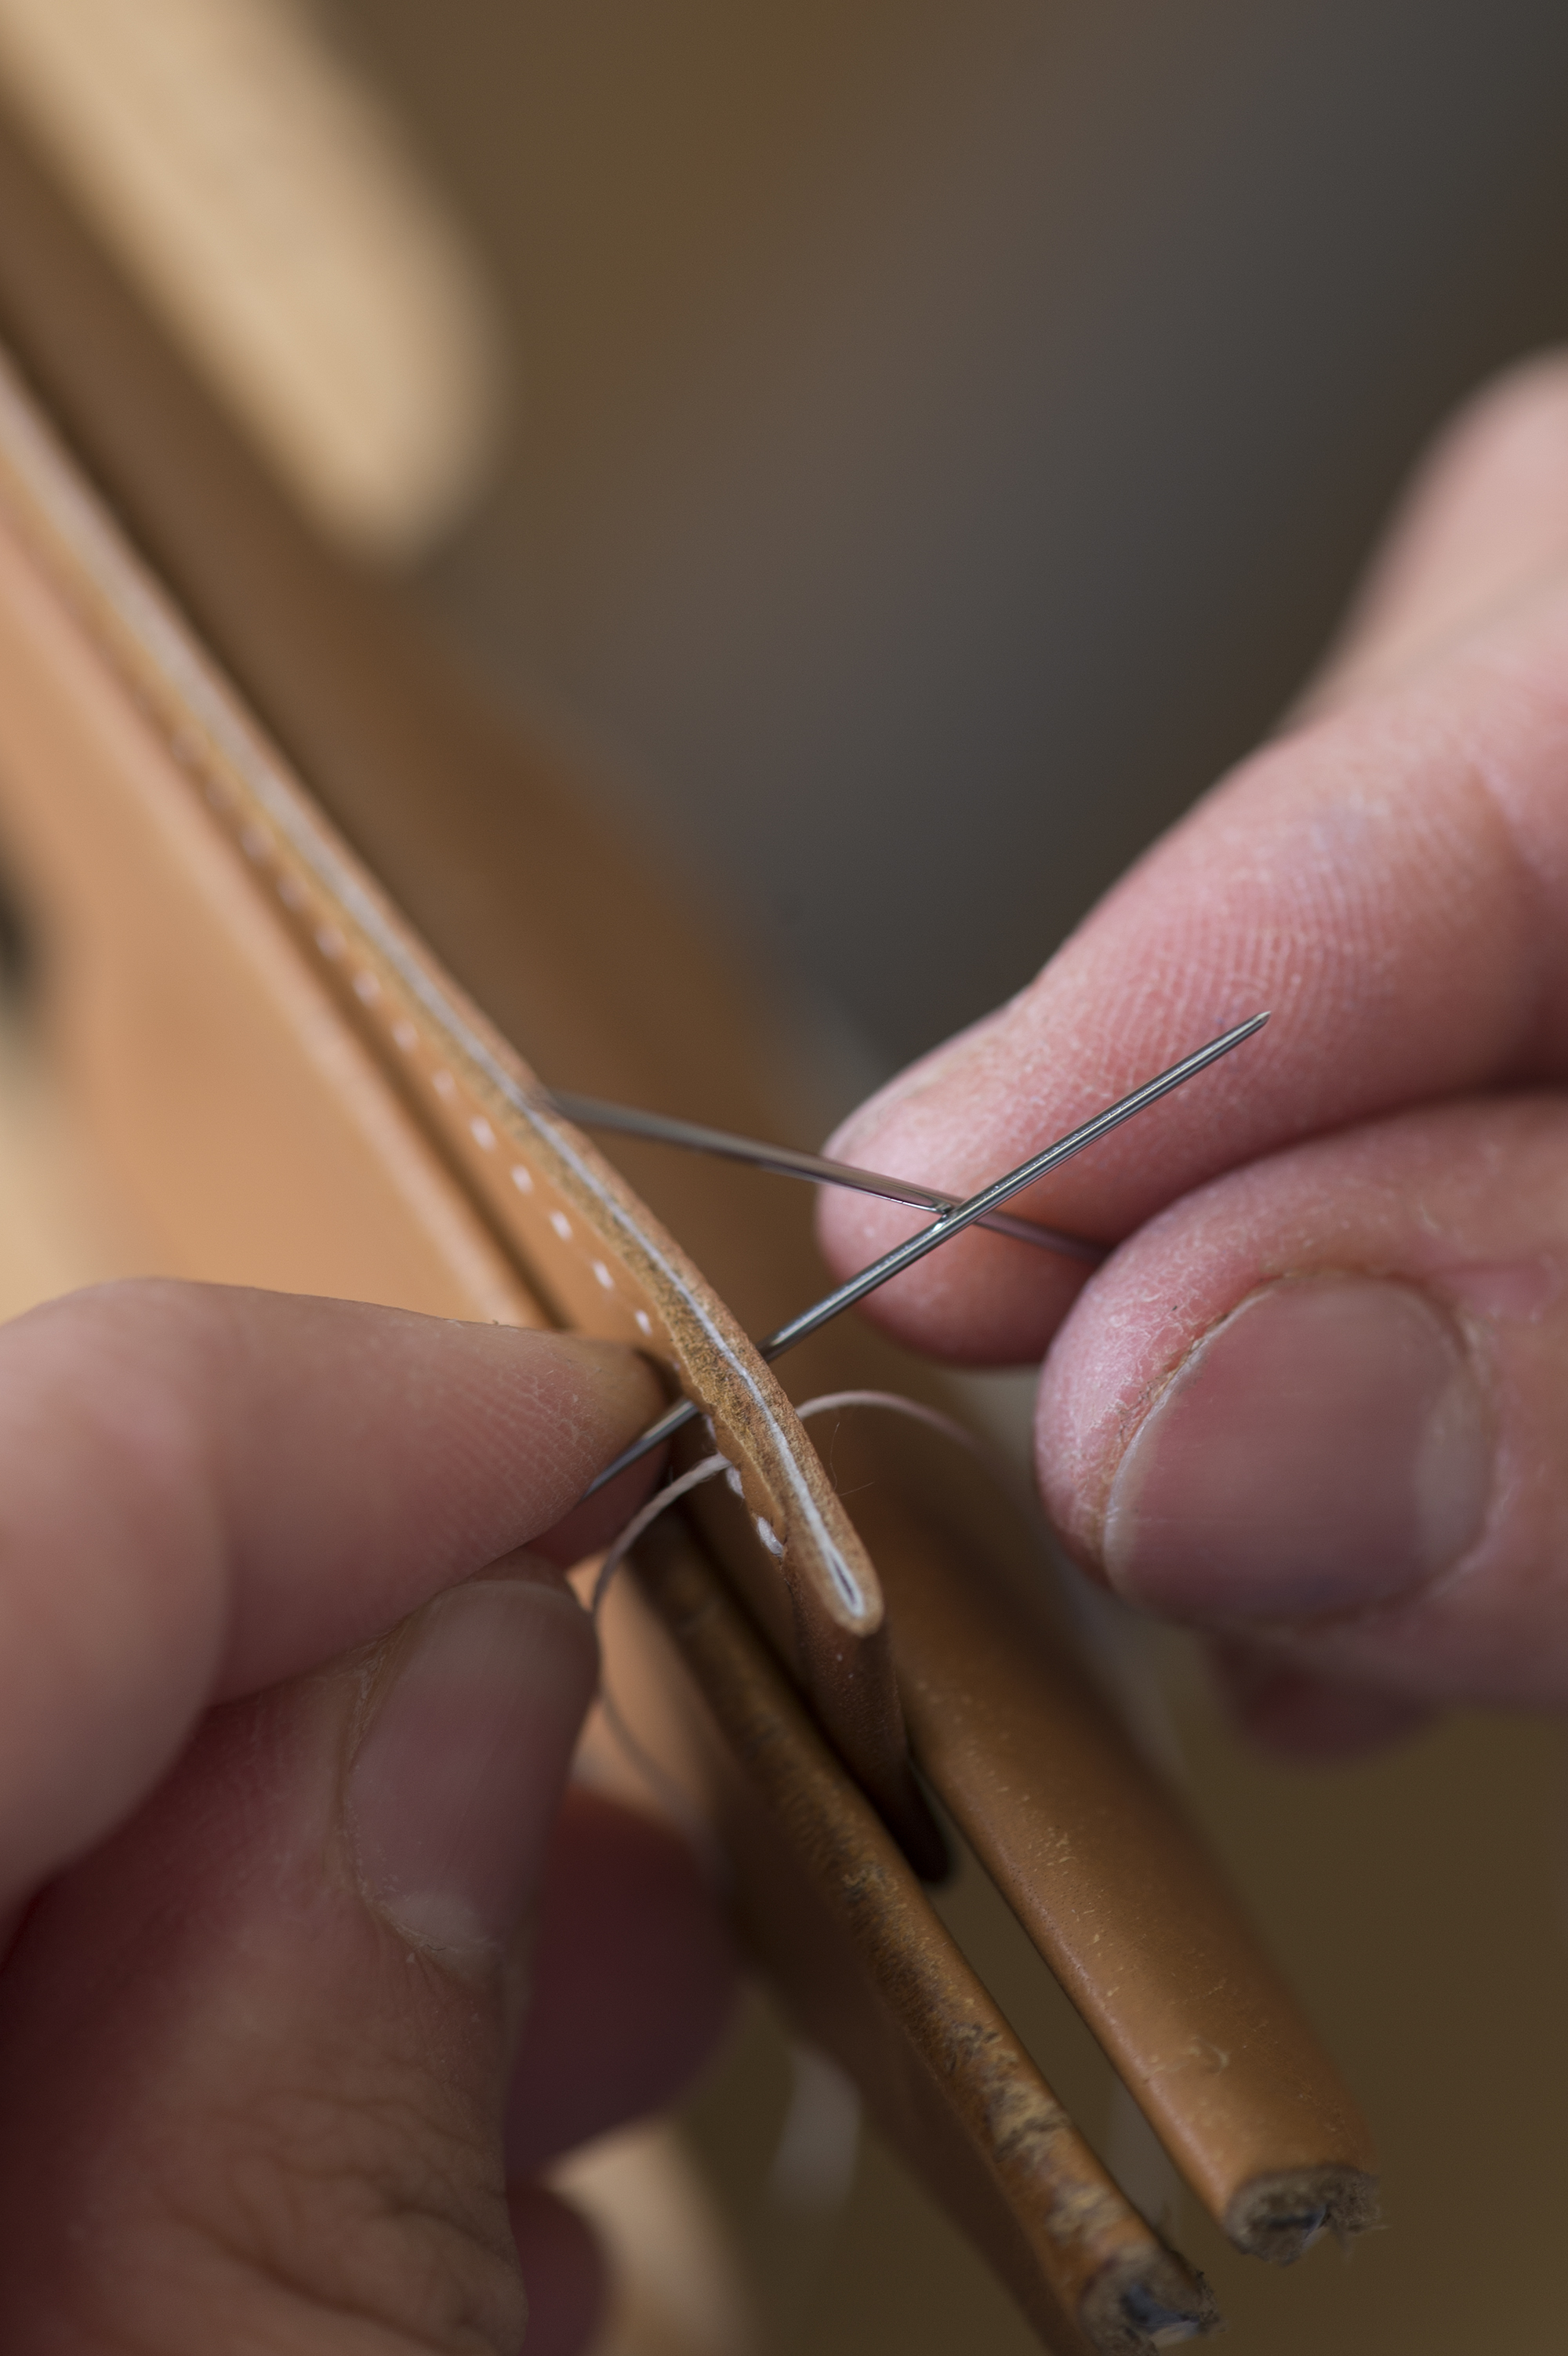 There are two main varieties of seams: machine-stitched and saddle-stitched. The latter requires two needles plied in opposite directions. The thread is knotted in the last few millimeters of the strap, where the “tunnel” for the spring bar is located. 